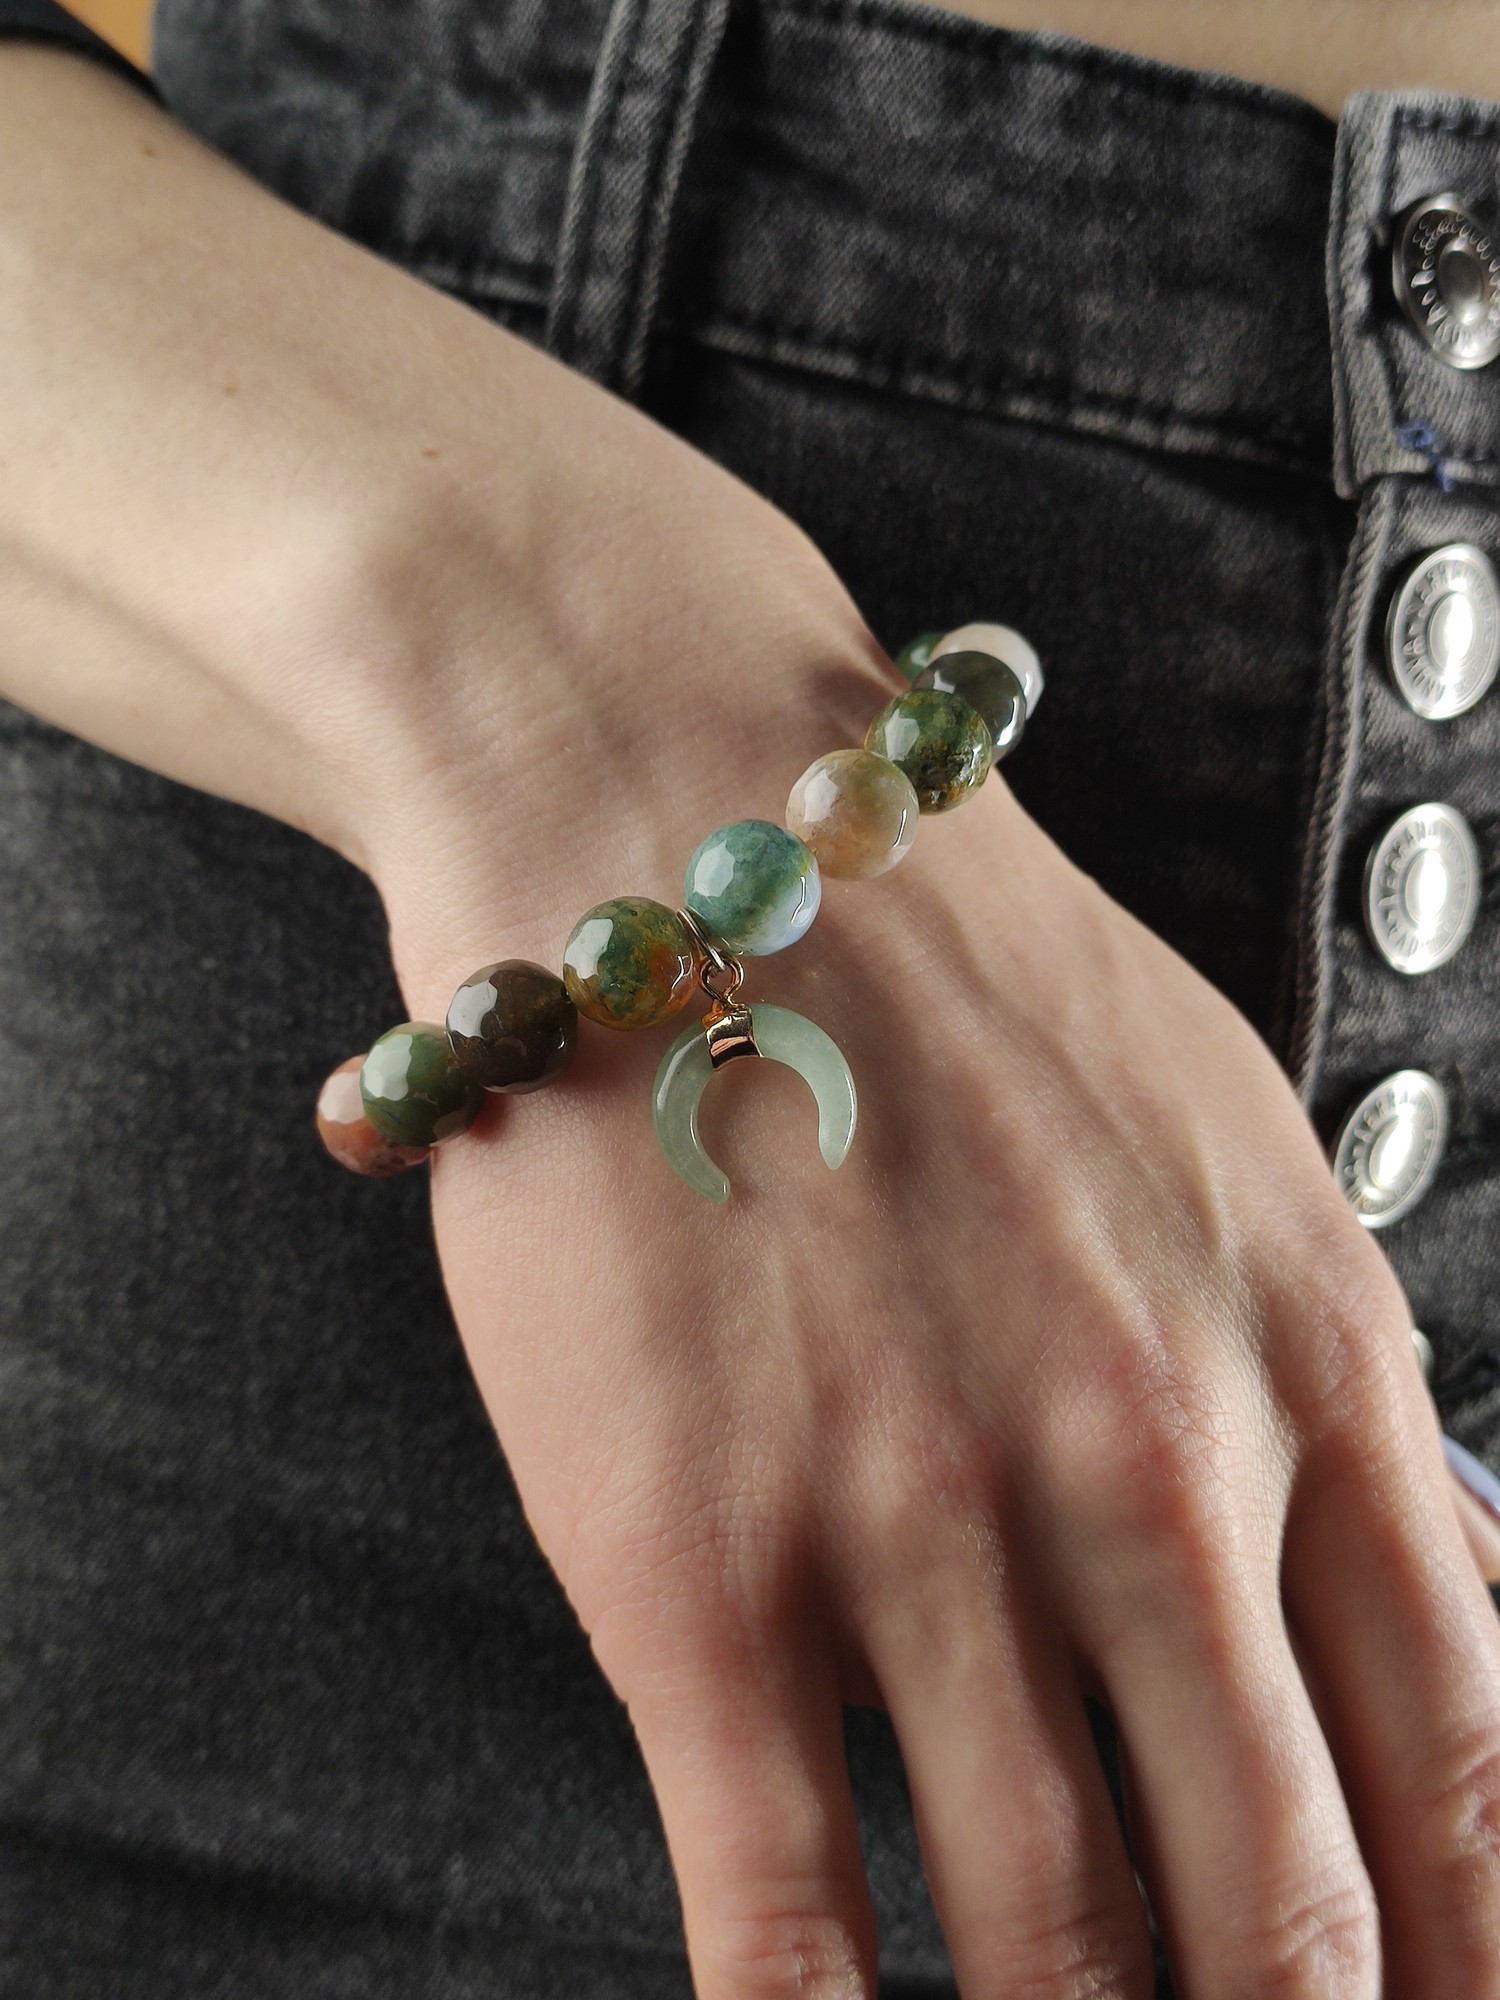 Green bracelet with natural stones and pendant